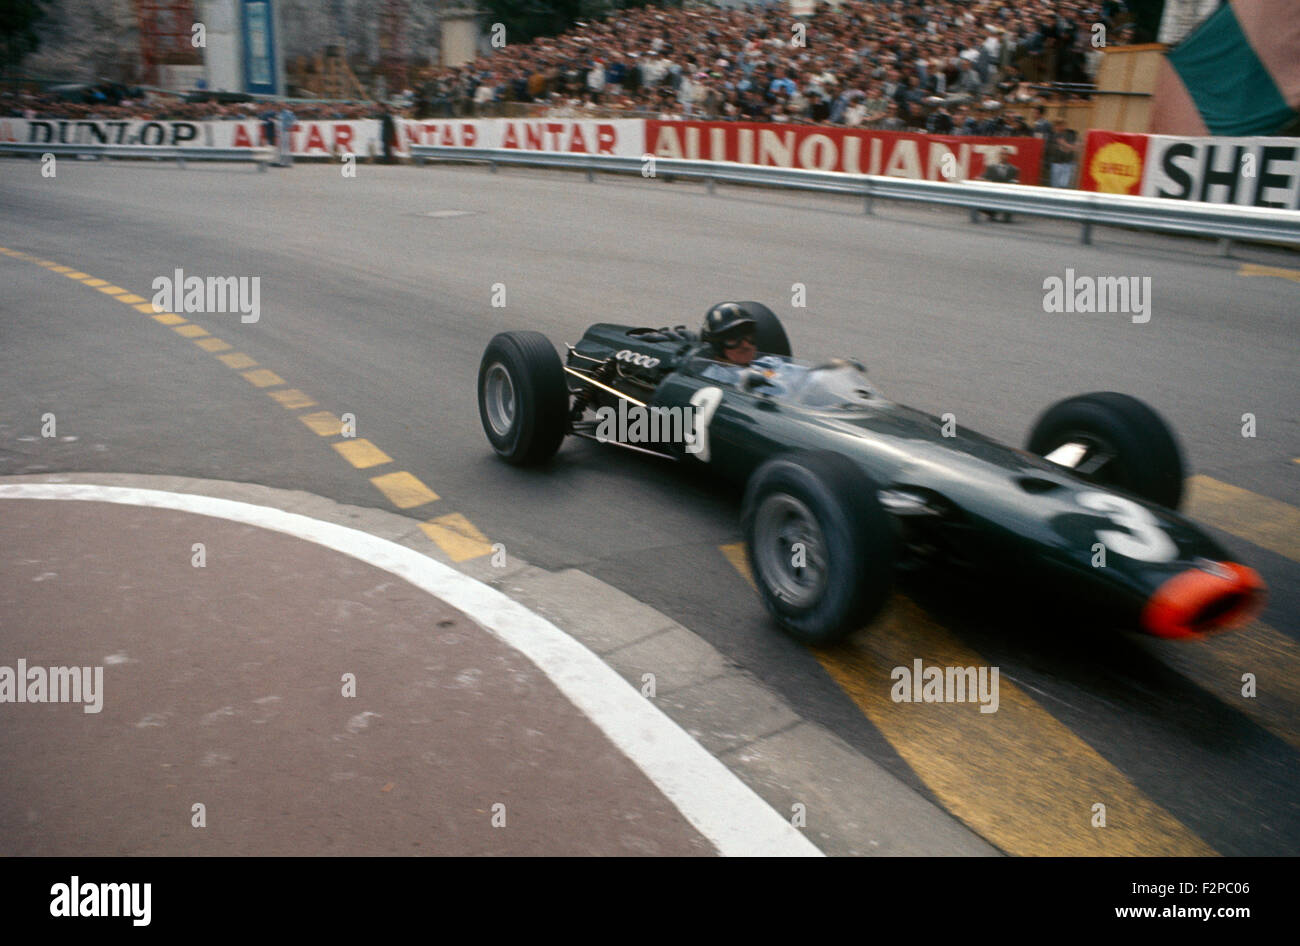 Graham Hill in his BRM racing car 1960s Stock Photo